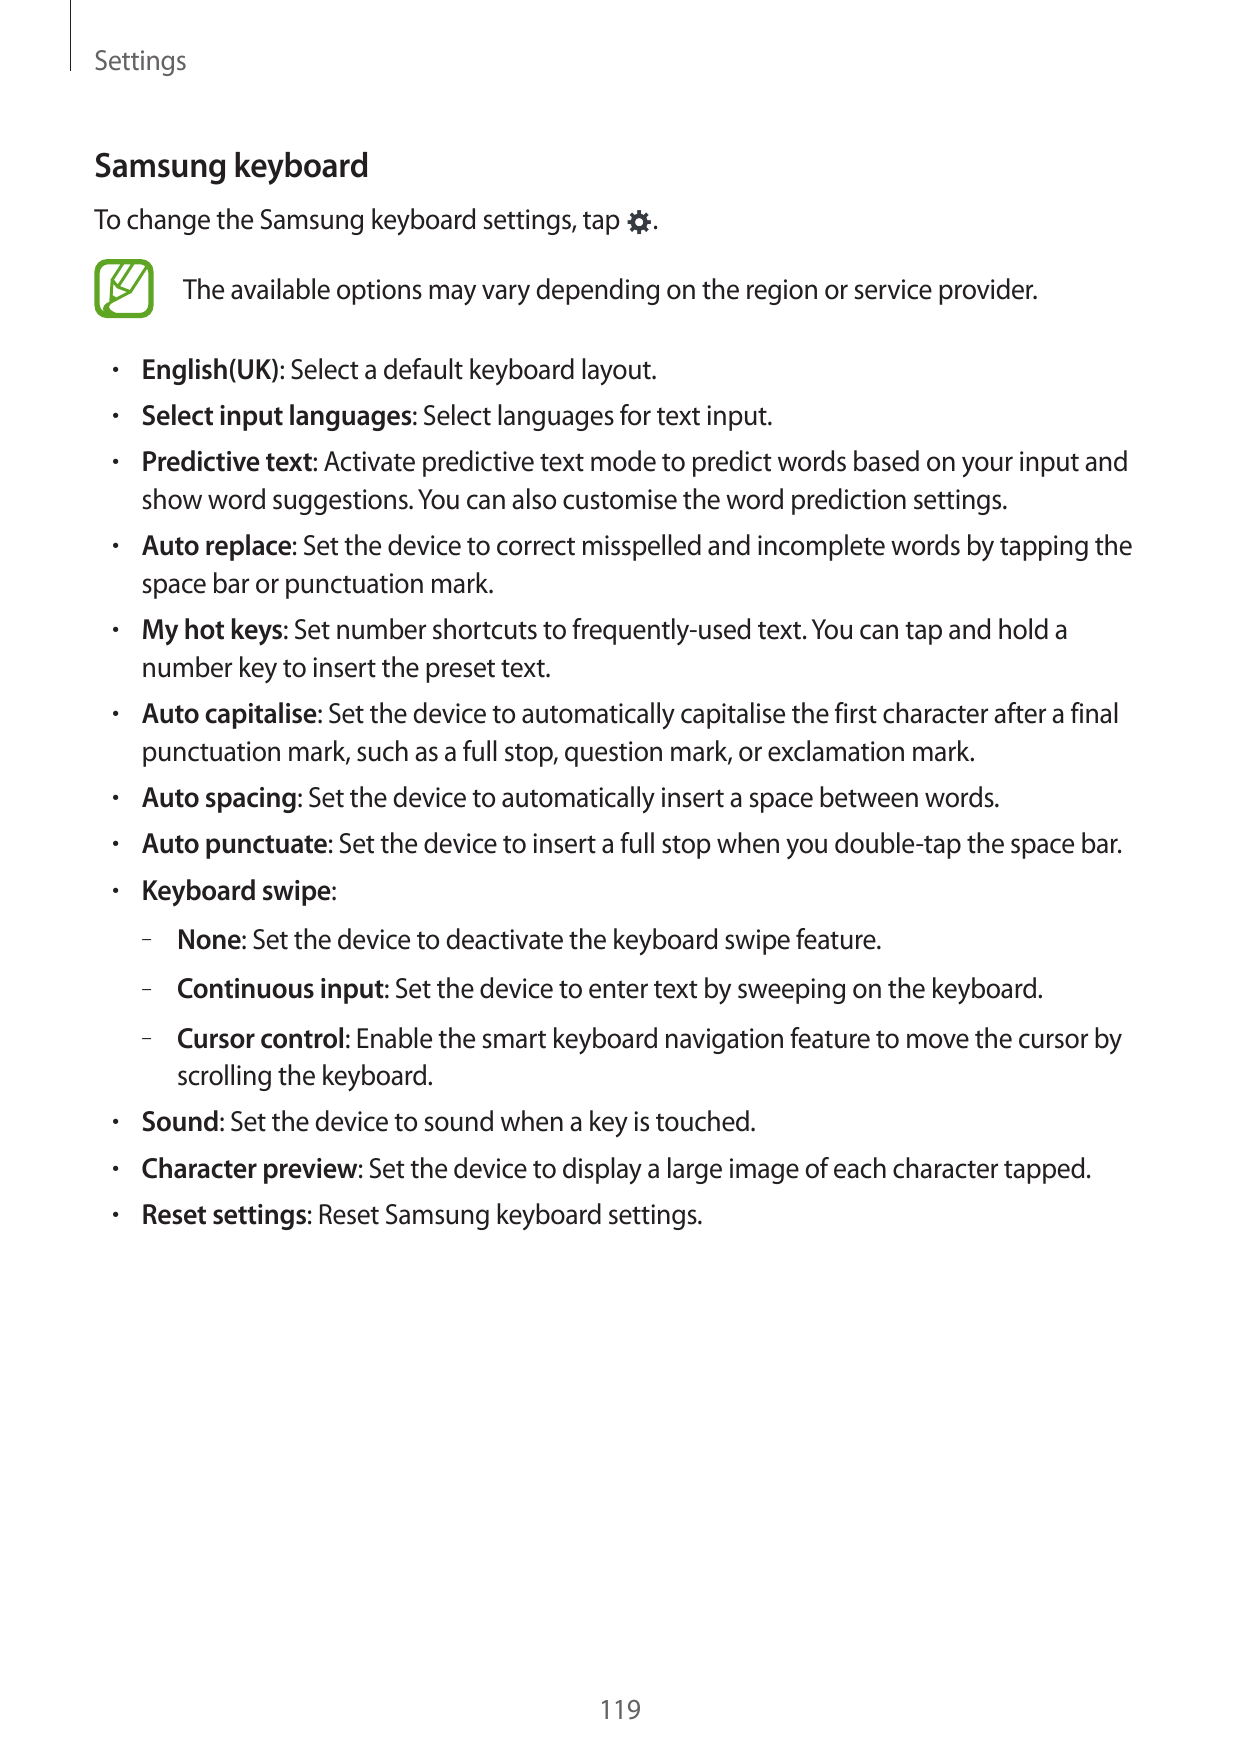 SettingsSamsung keyboardTo change the Samsung keyboard settings, tap.The available options may vary depending on the region or s